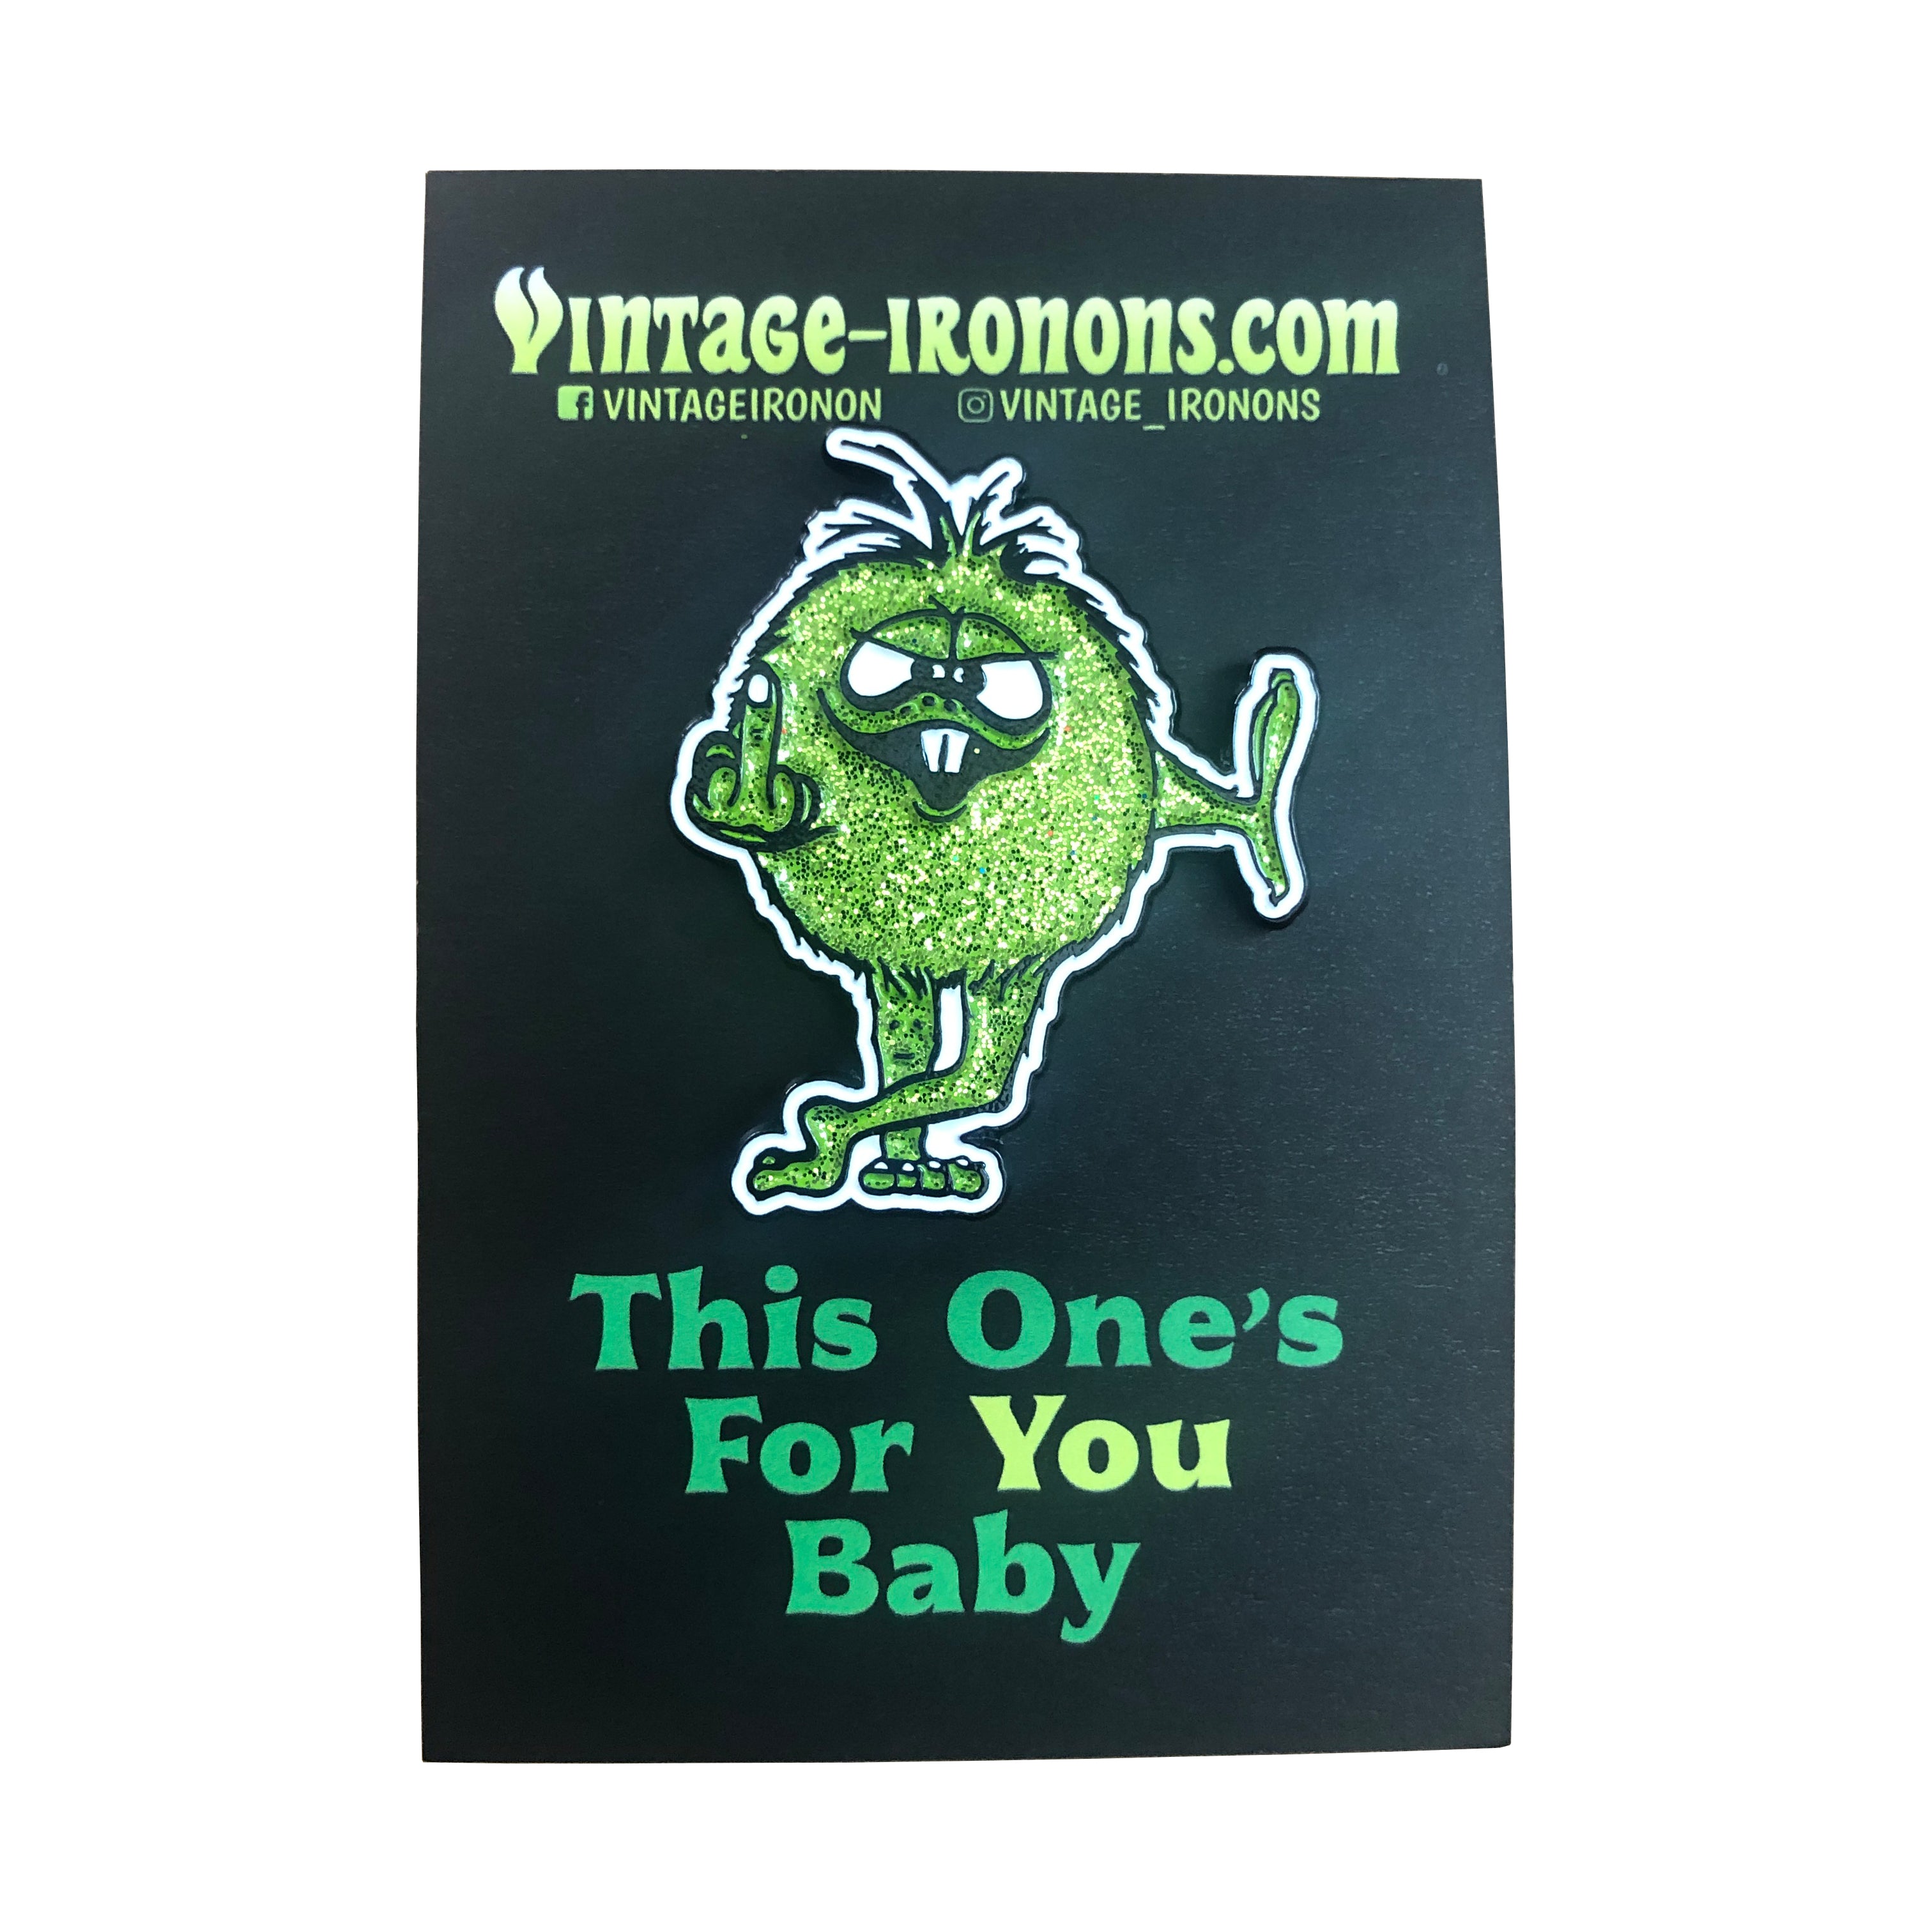 This One's For You Baby! Green Glitter Glow-in-the-Dark Enamel Pin